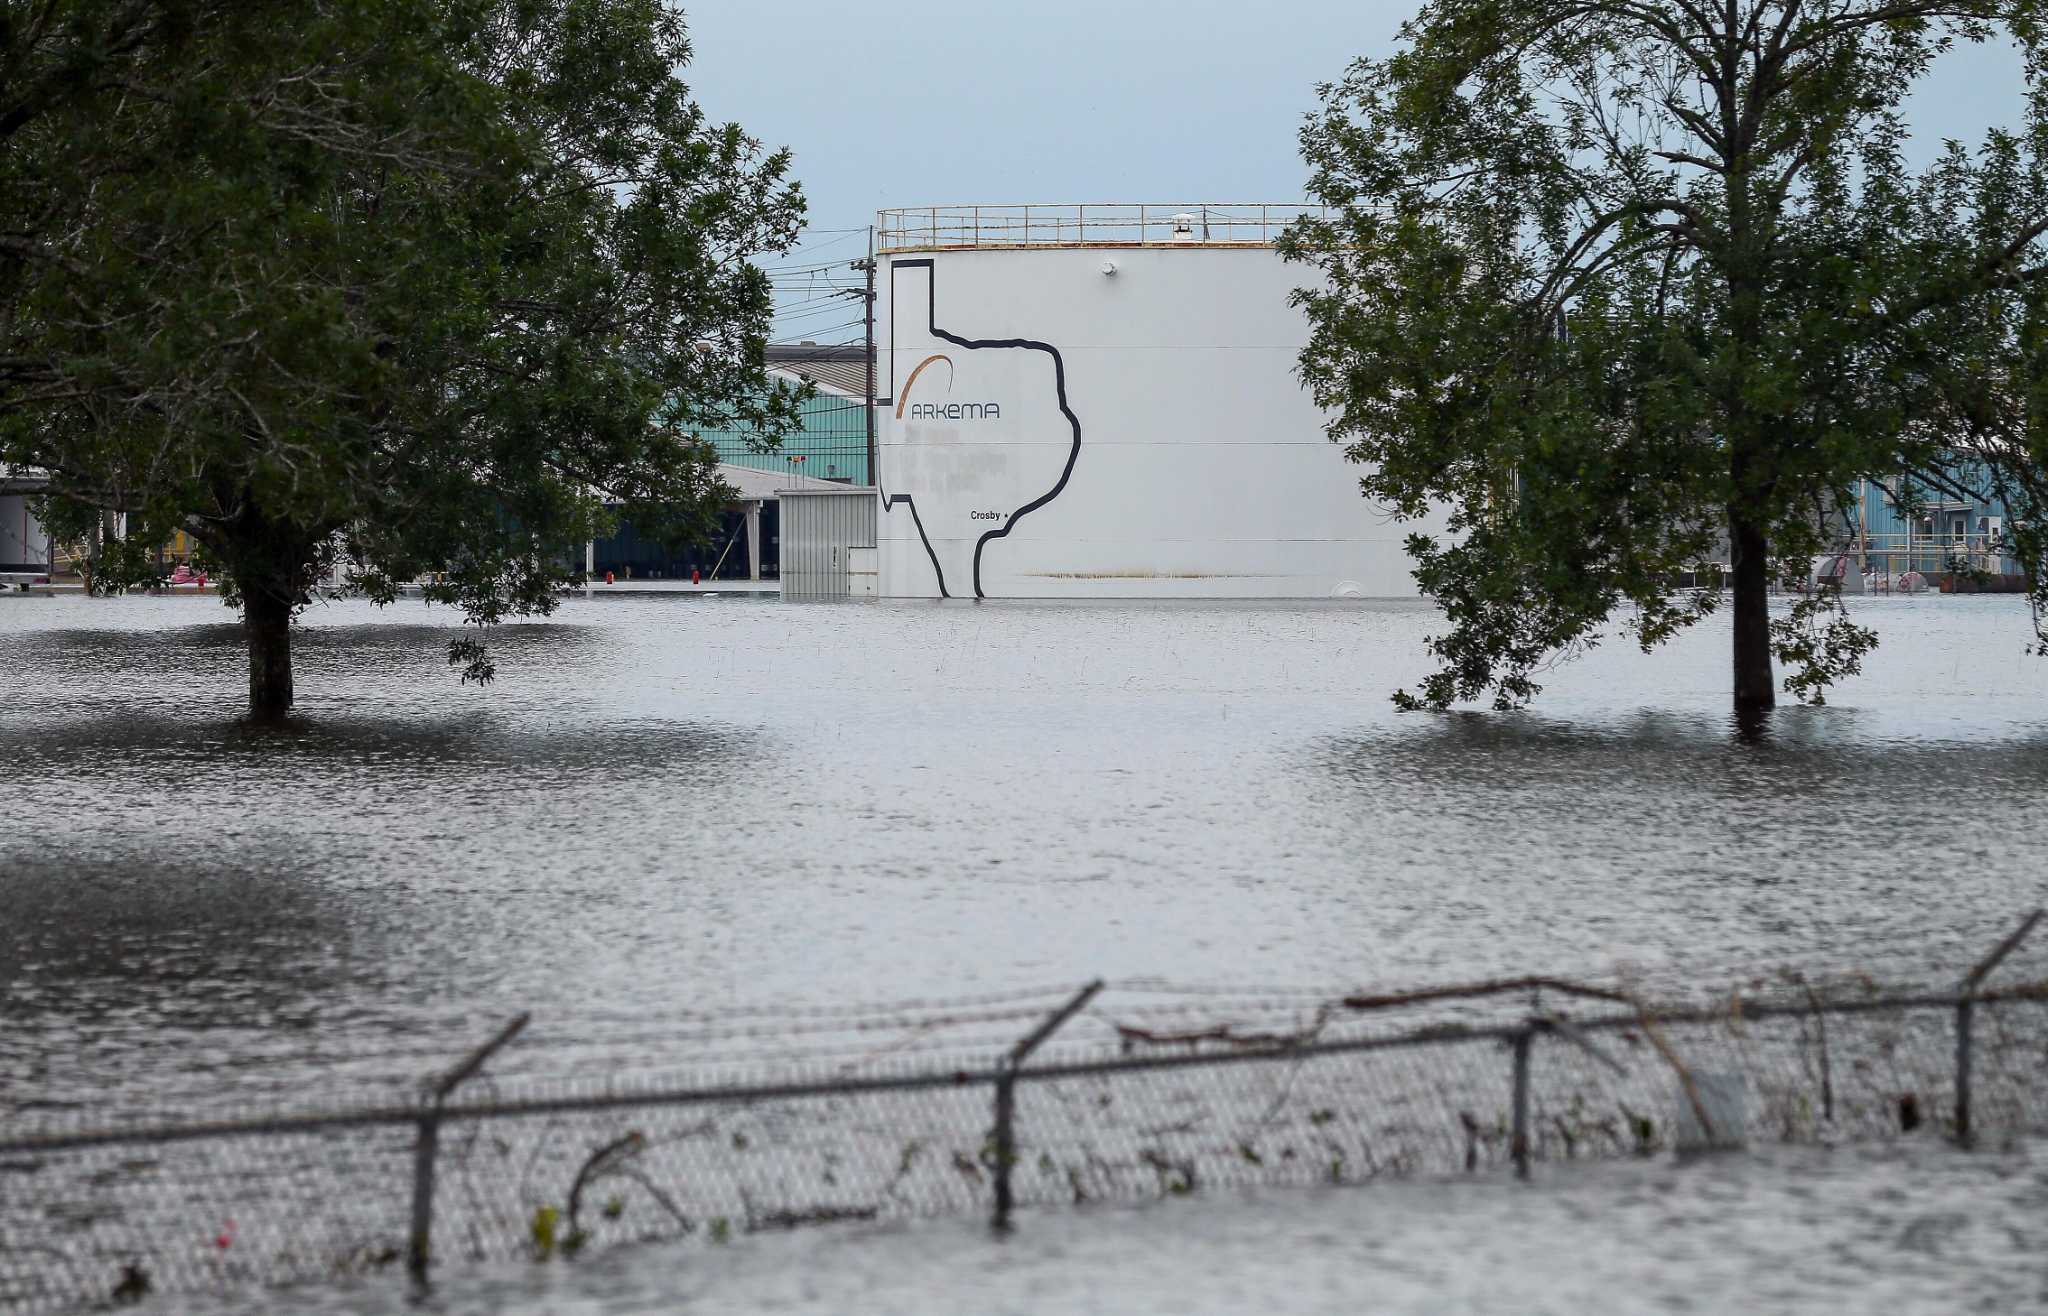 Gulf chemical plants unprepared for increasing flood risk from climate change: report - Houston Chronicle